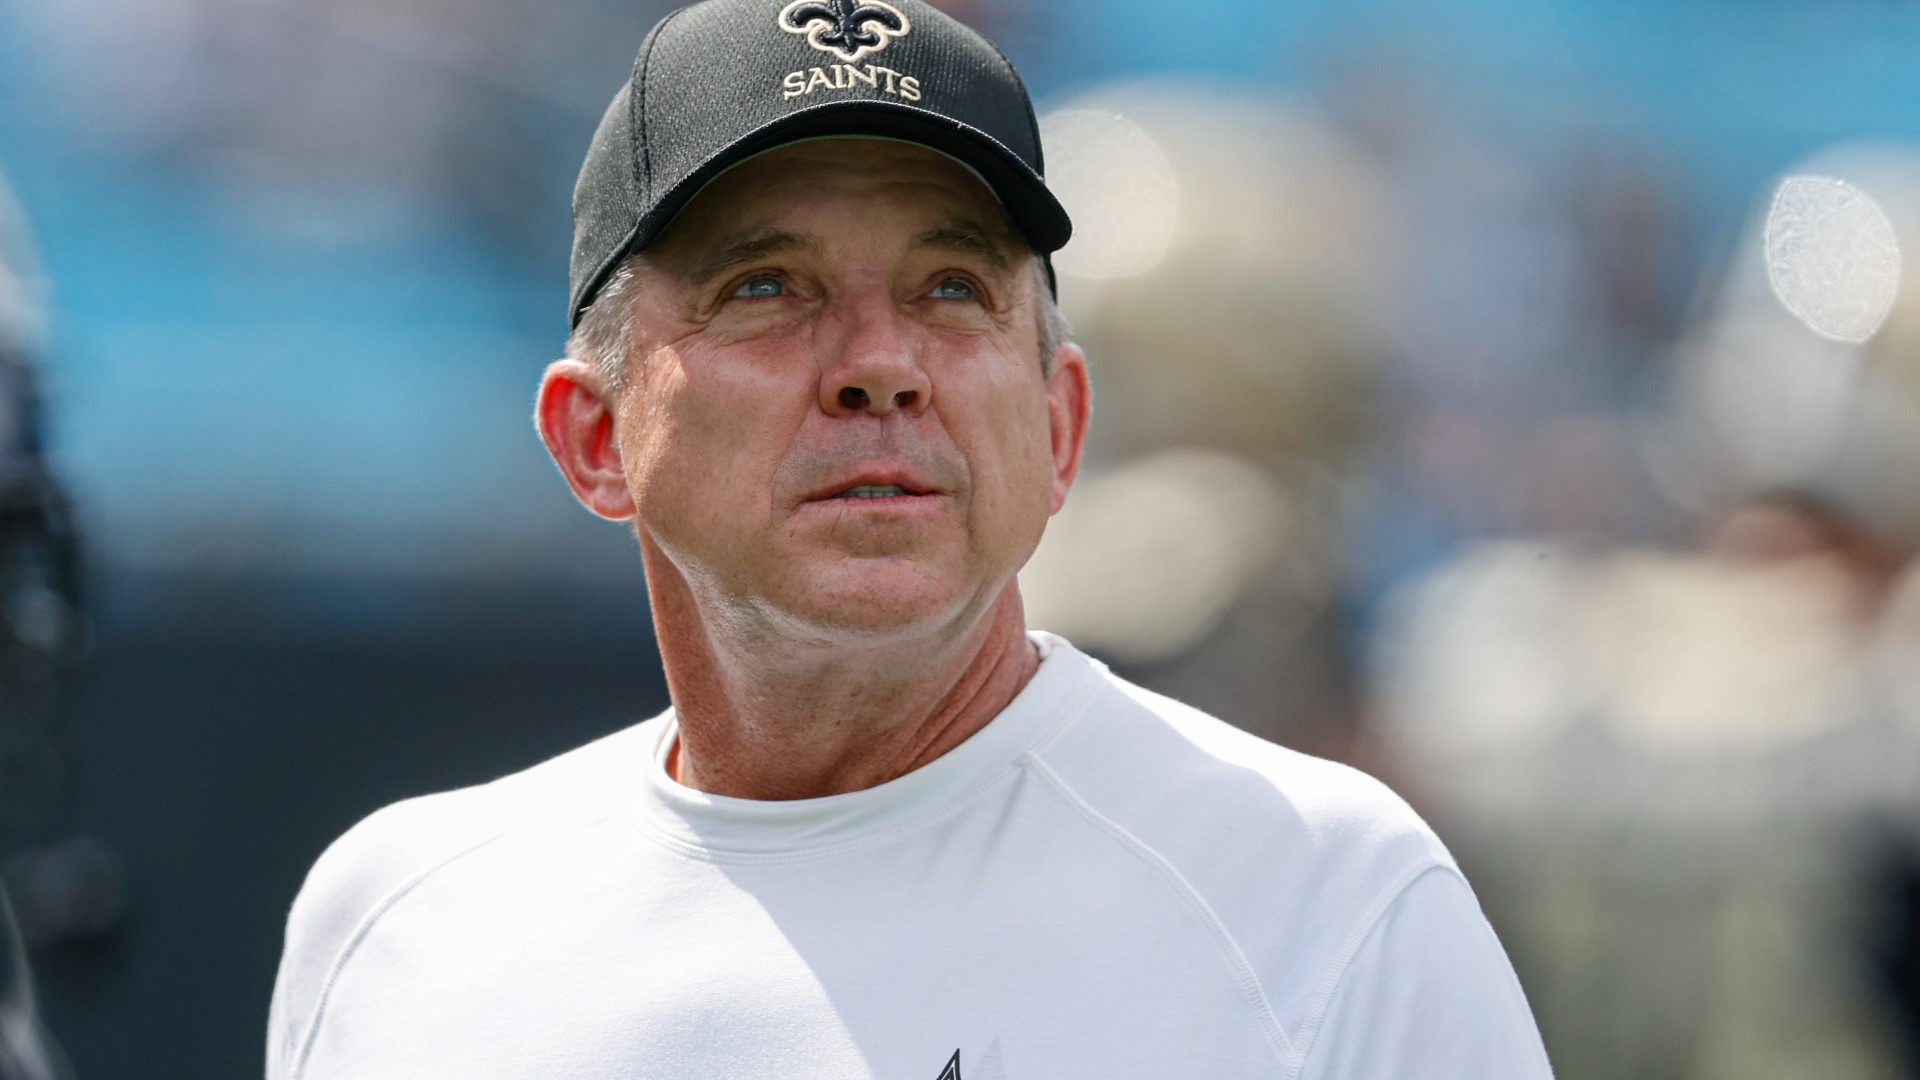 WWL-TV's Doug Mouton and Brooke Kirchhofer along with New Orleans Football's Nick Underhill, discuss the trade of Sean Payton.